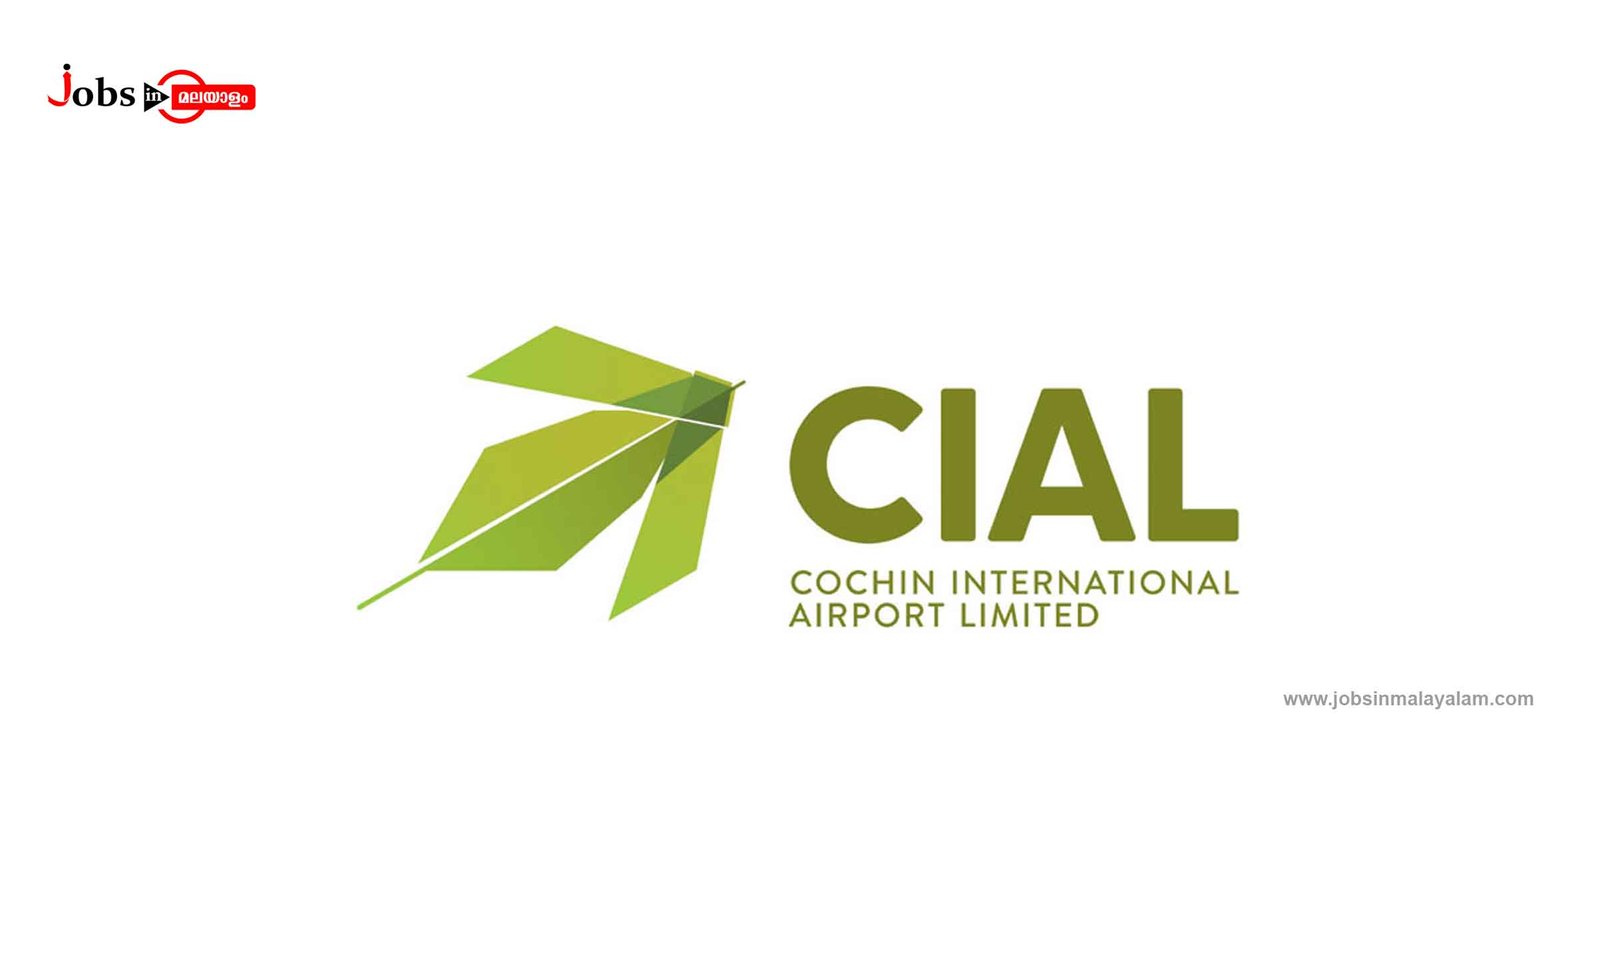 Cochin International Airport Limited (CIAL)